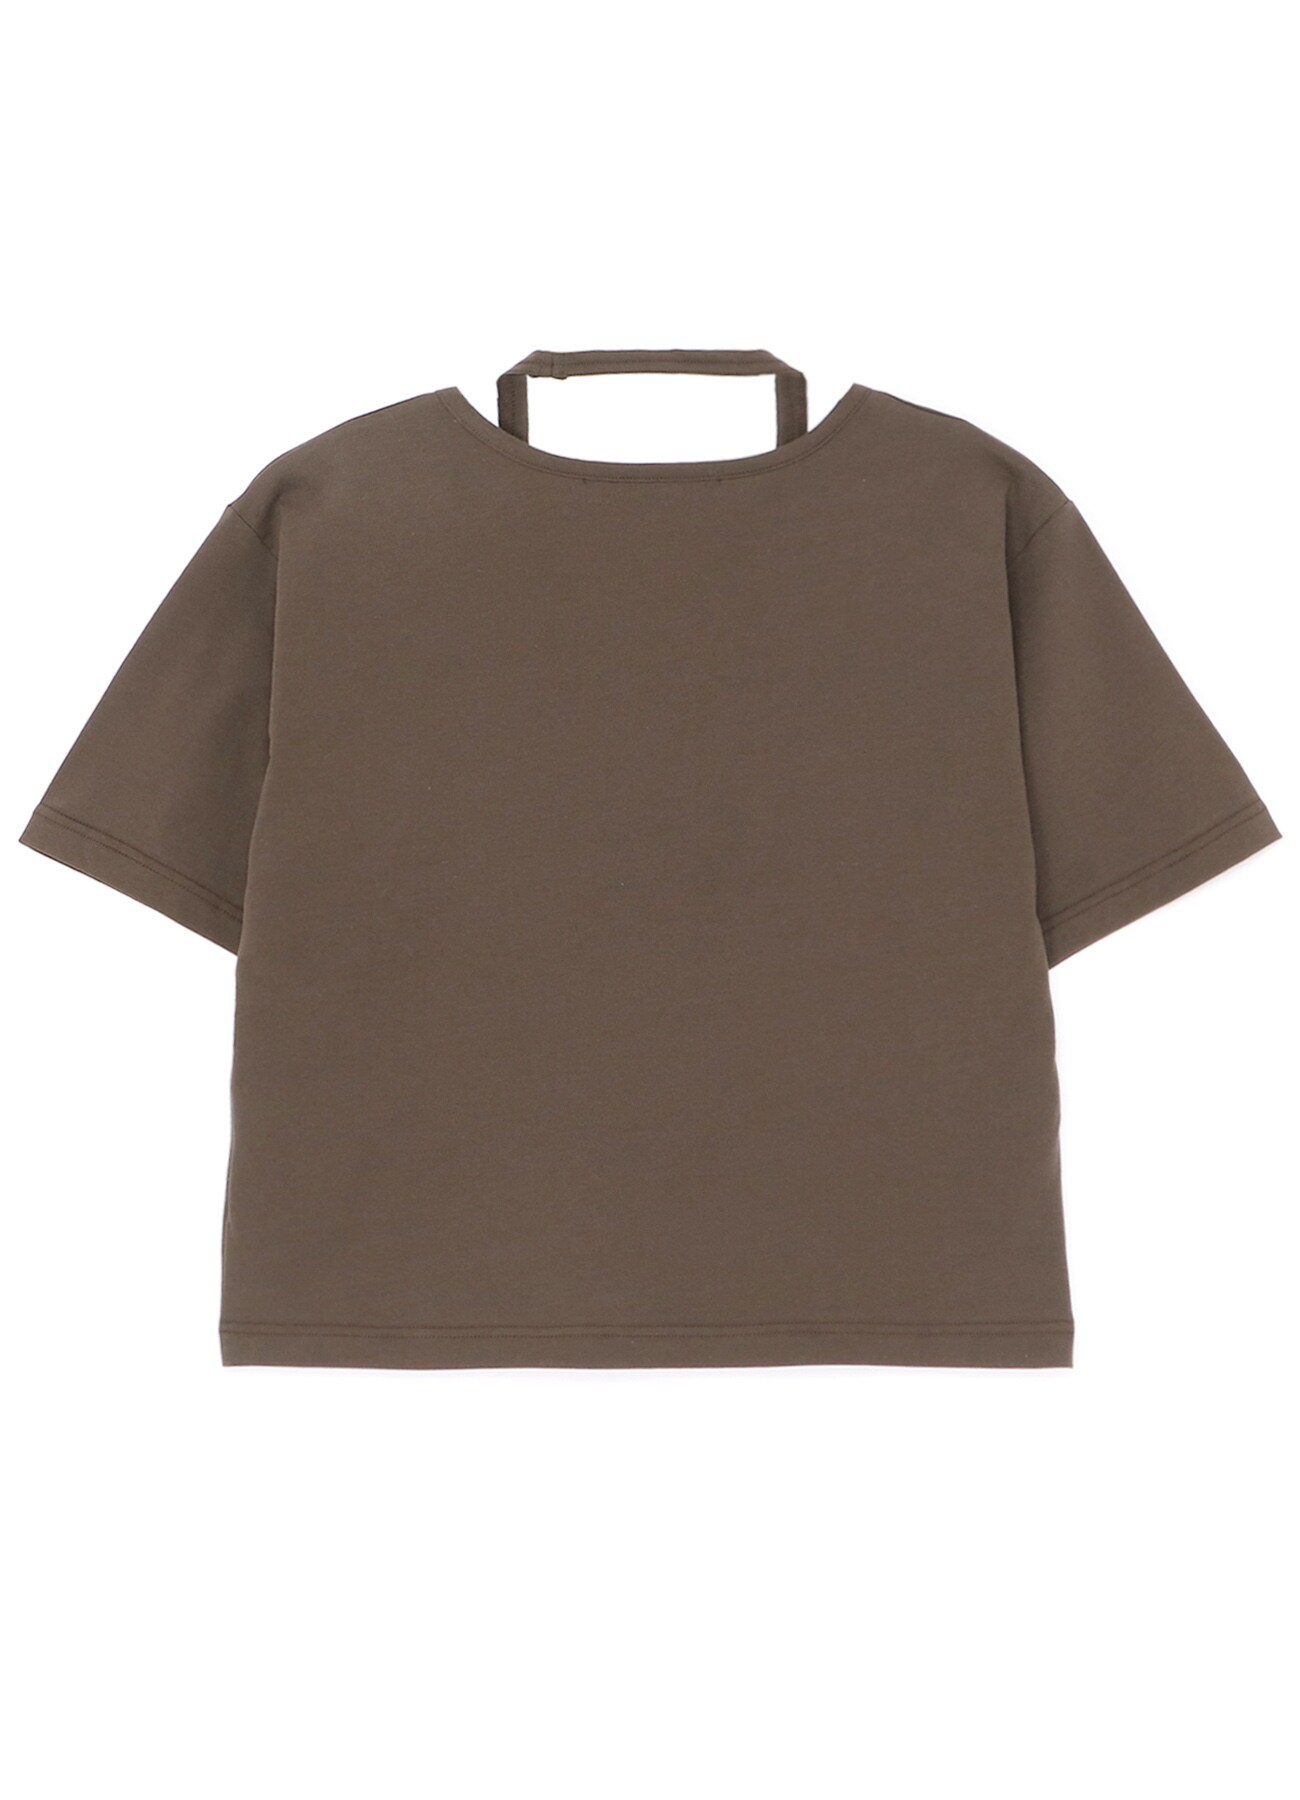 72/2 SINGLE COTTON JERSEY T-SHIRT WITH DECONSTRUCTED NECKLINE